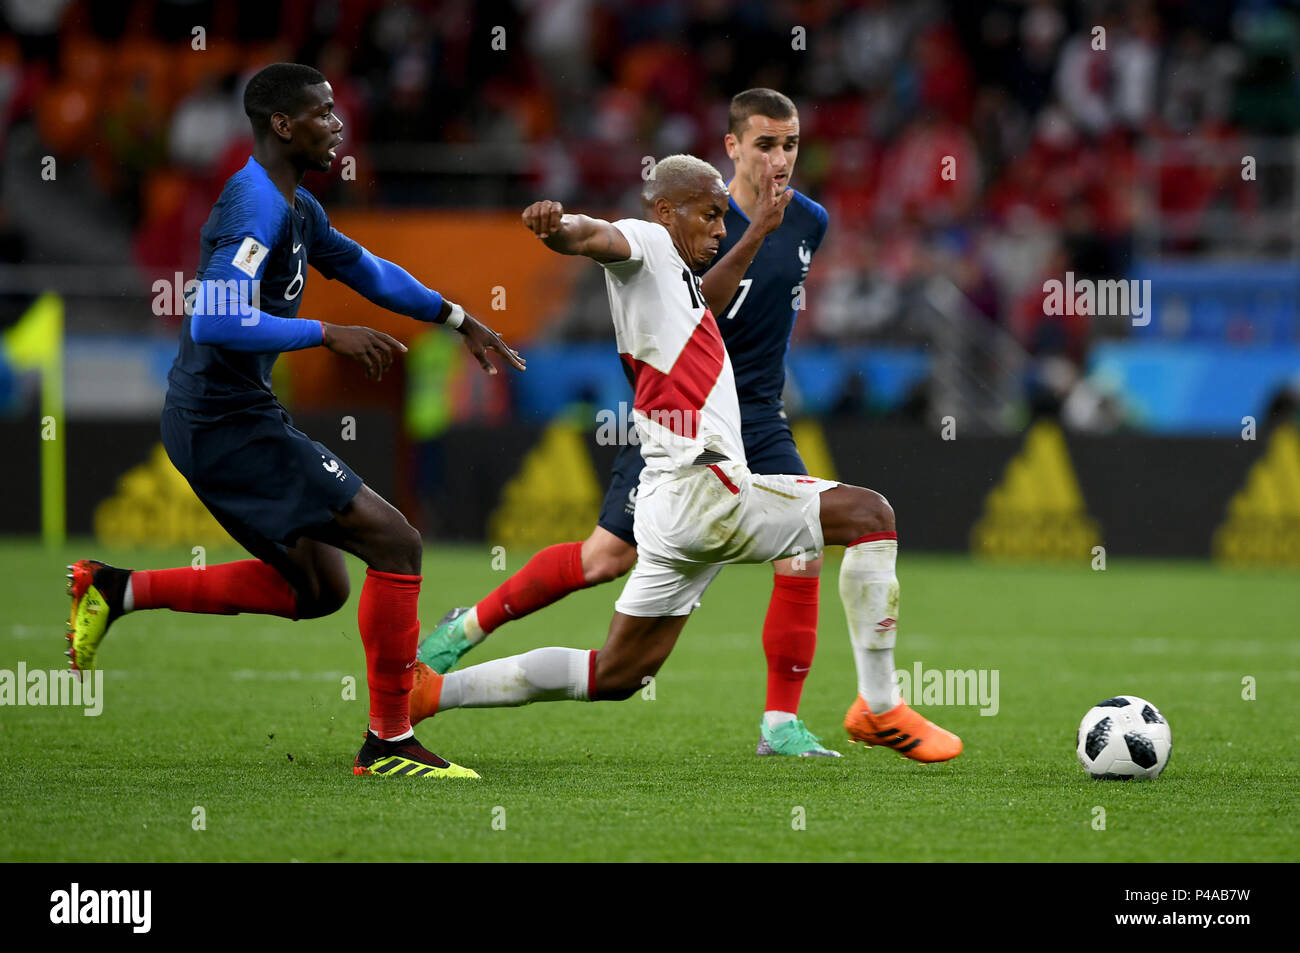 Yekaterinburg, Russia. 21st June, 2018. Andre Carrillo (C) of Peru competes during the 2018 FIFA World Cup Group C match between France and Peru in Yekaterinburg, Russia, June 21, 2018. Credit: Du Yu/Xinhua/Alamy Live News Stock Photo